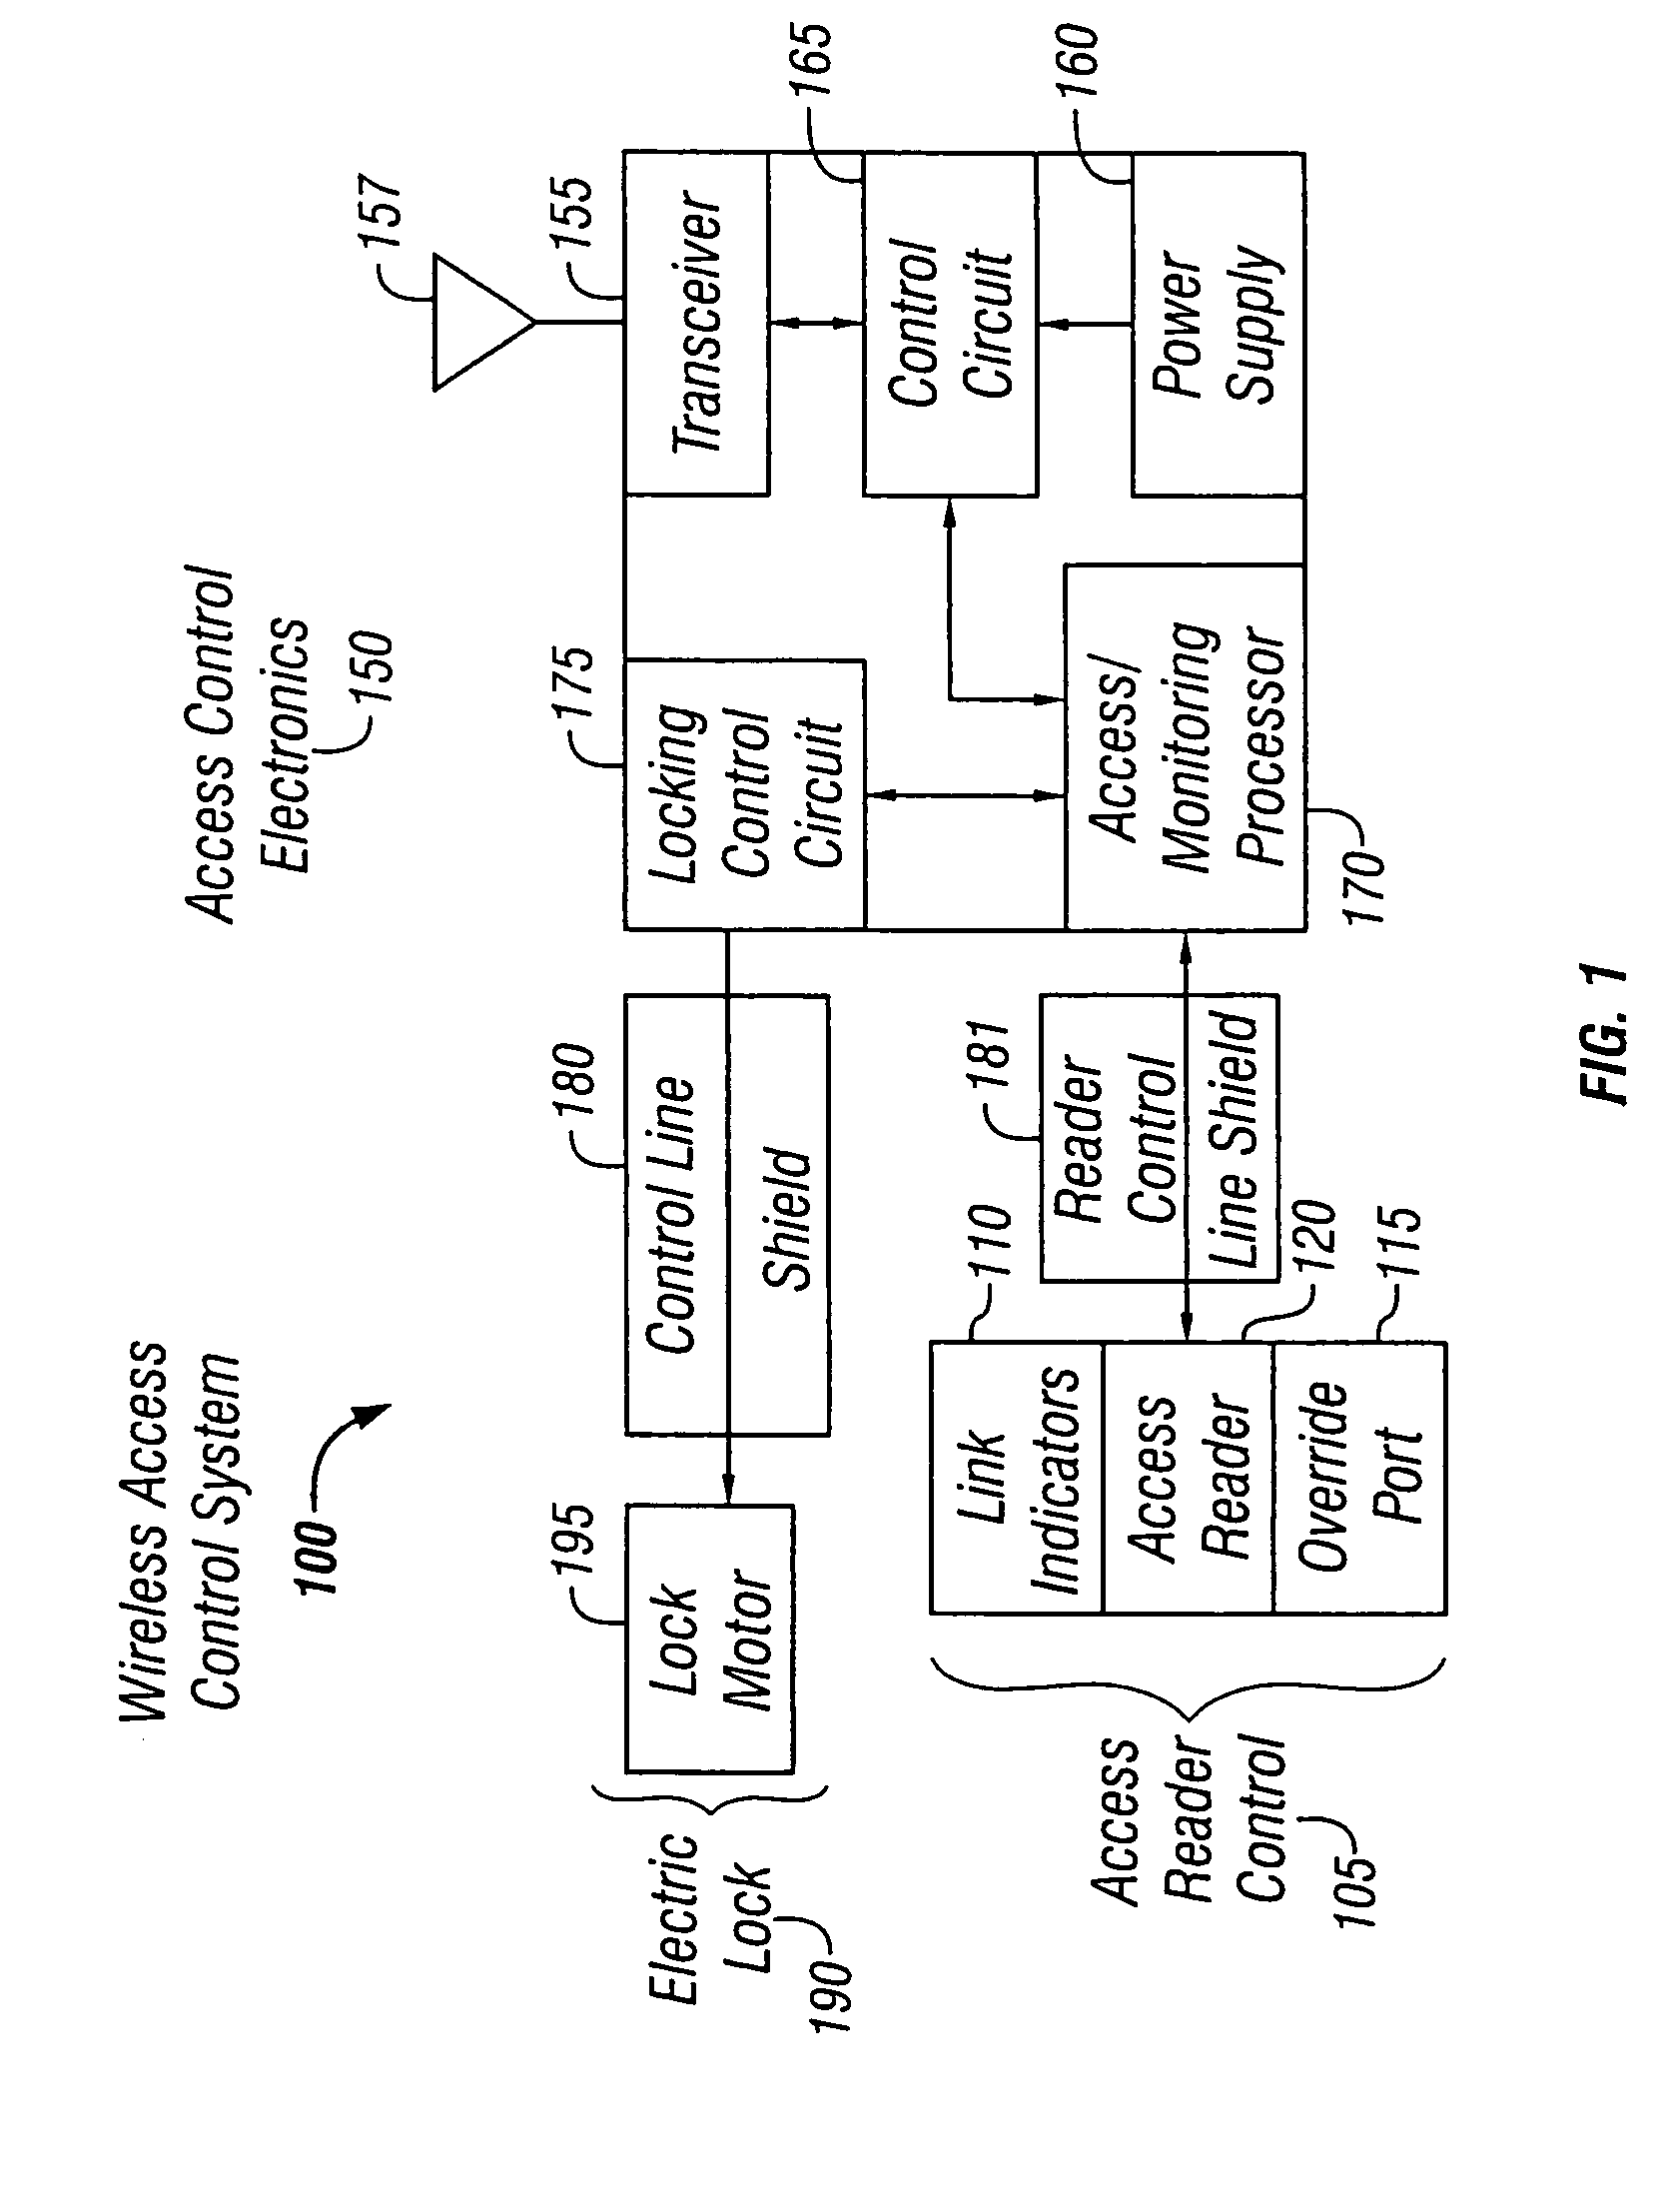 Door wireless access control system including reader, lock, and wireless access control electronics including wireless transceiver